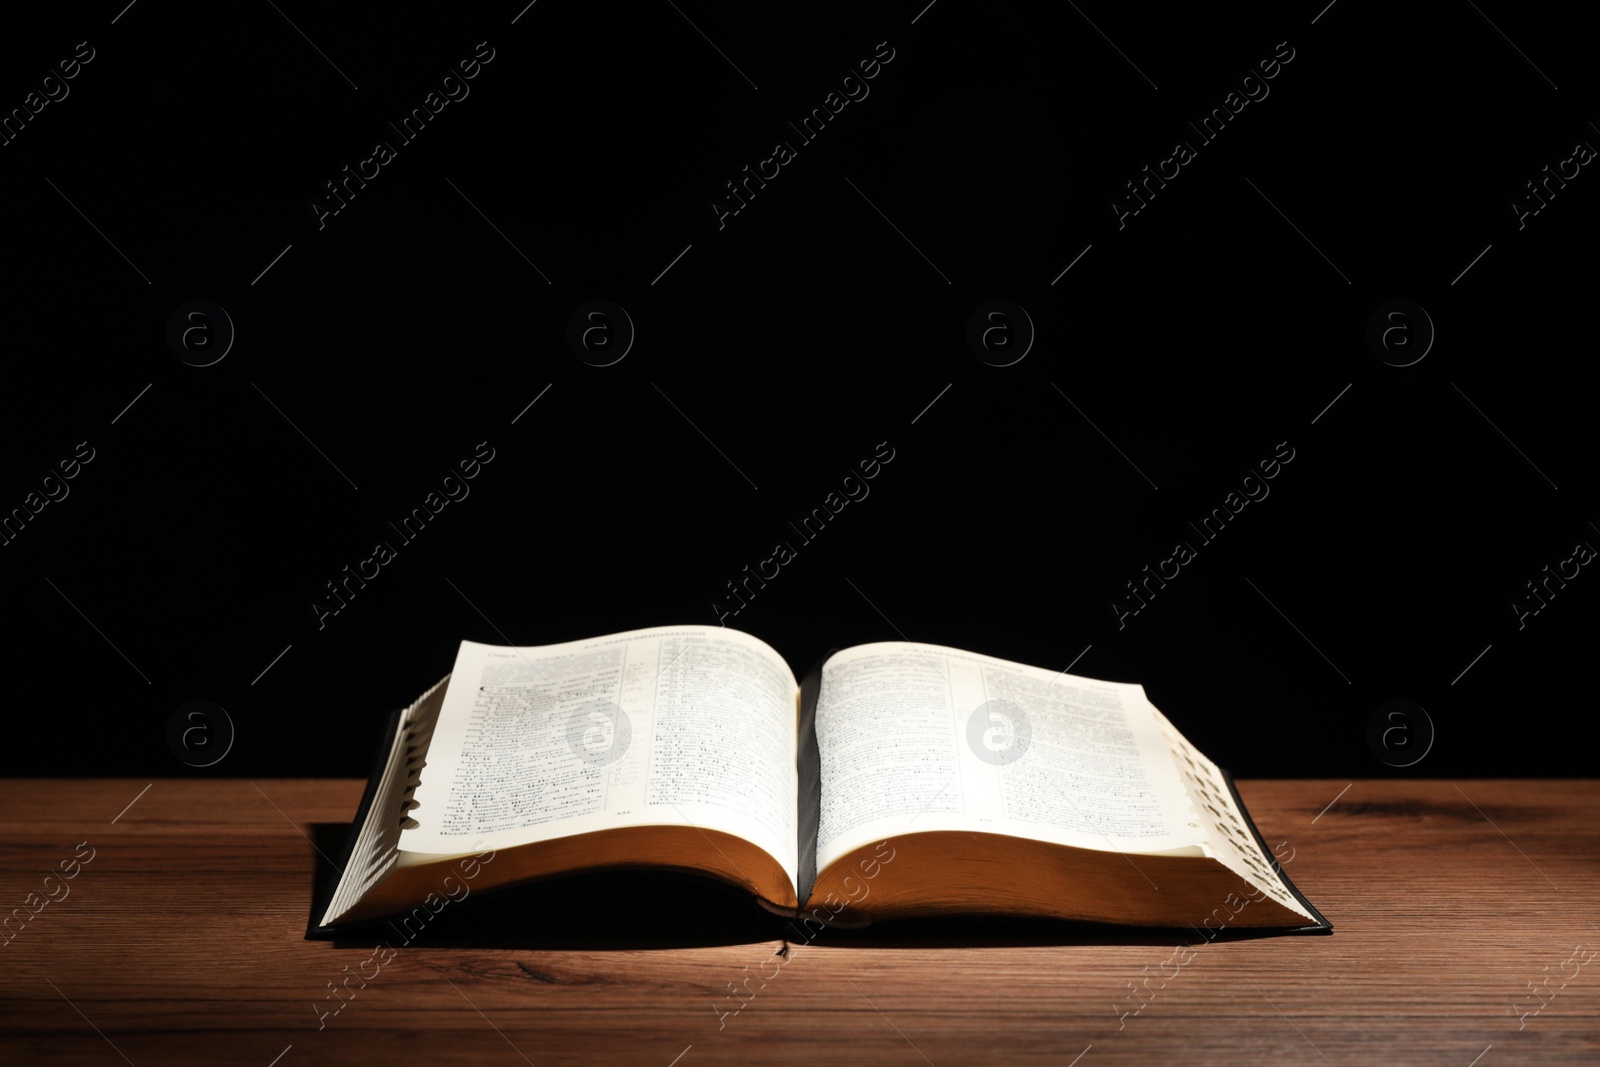 Photo of Open Bible on wooden table against black background. Christian religious book